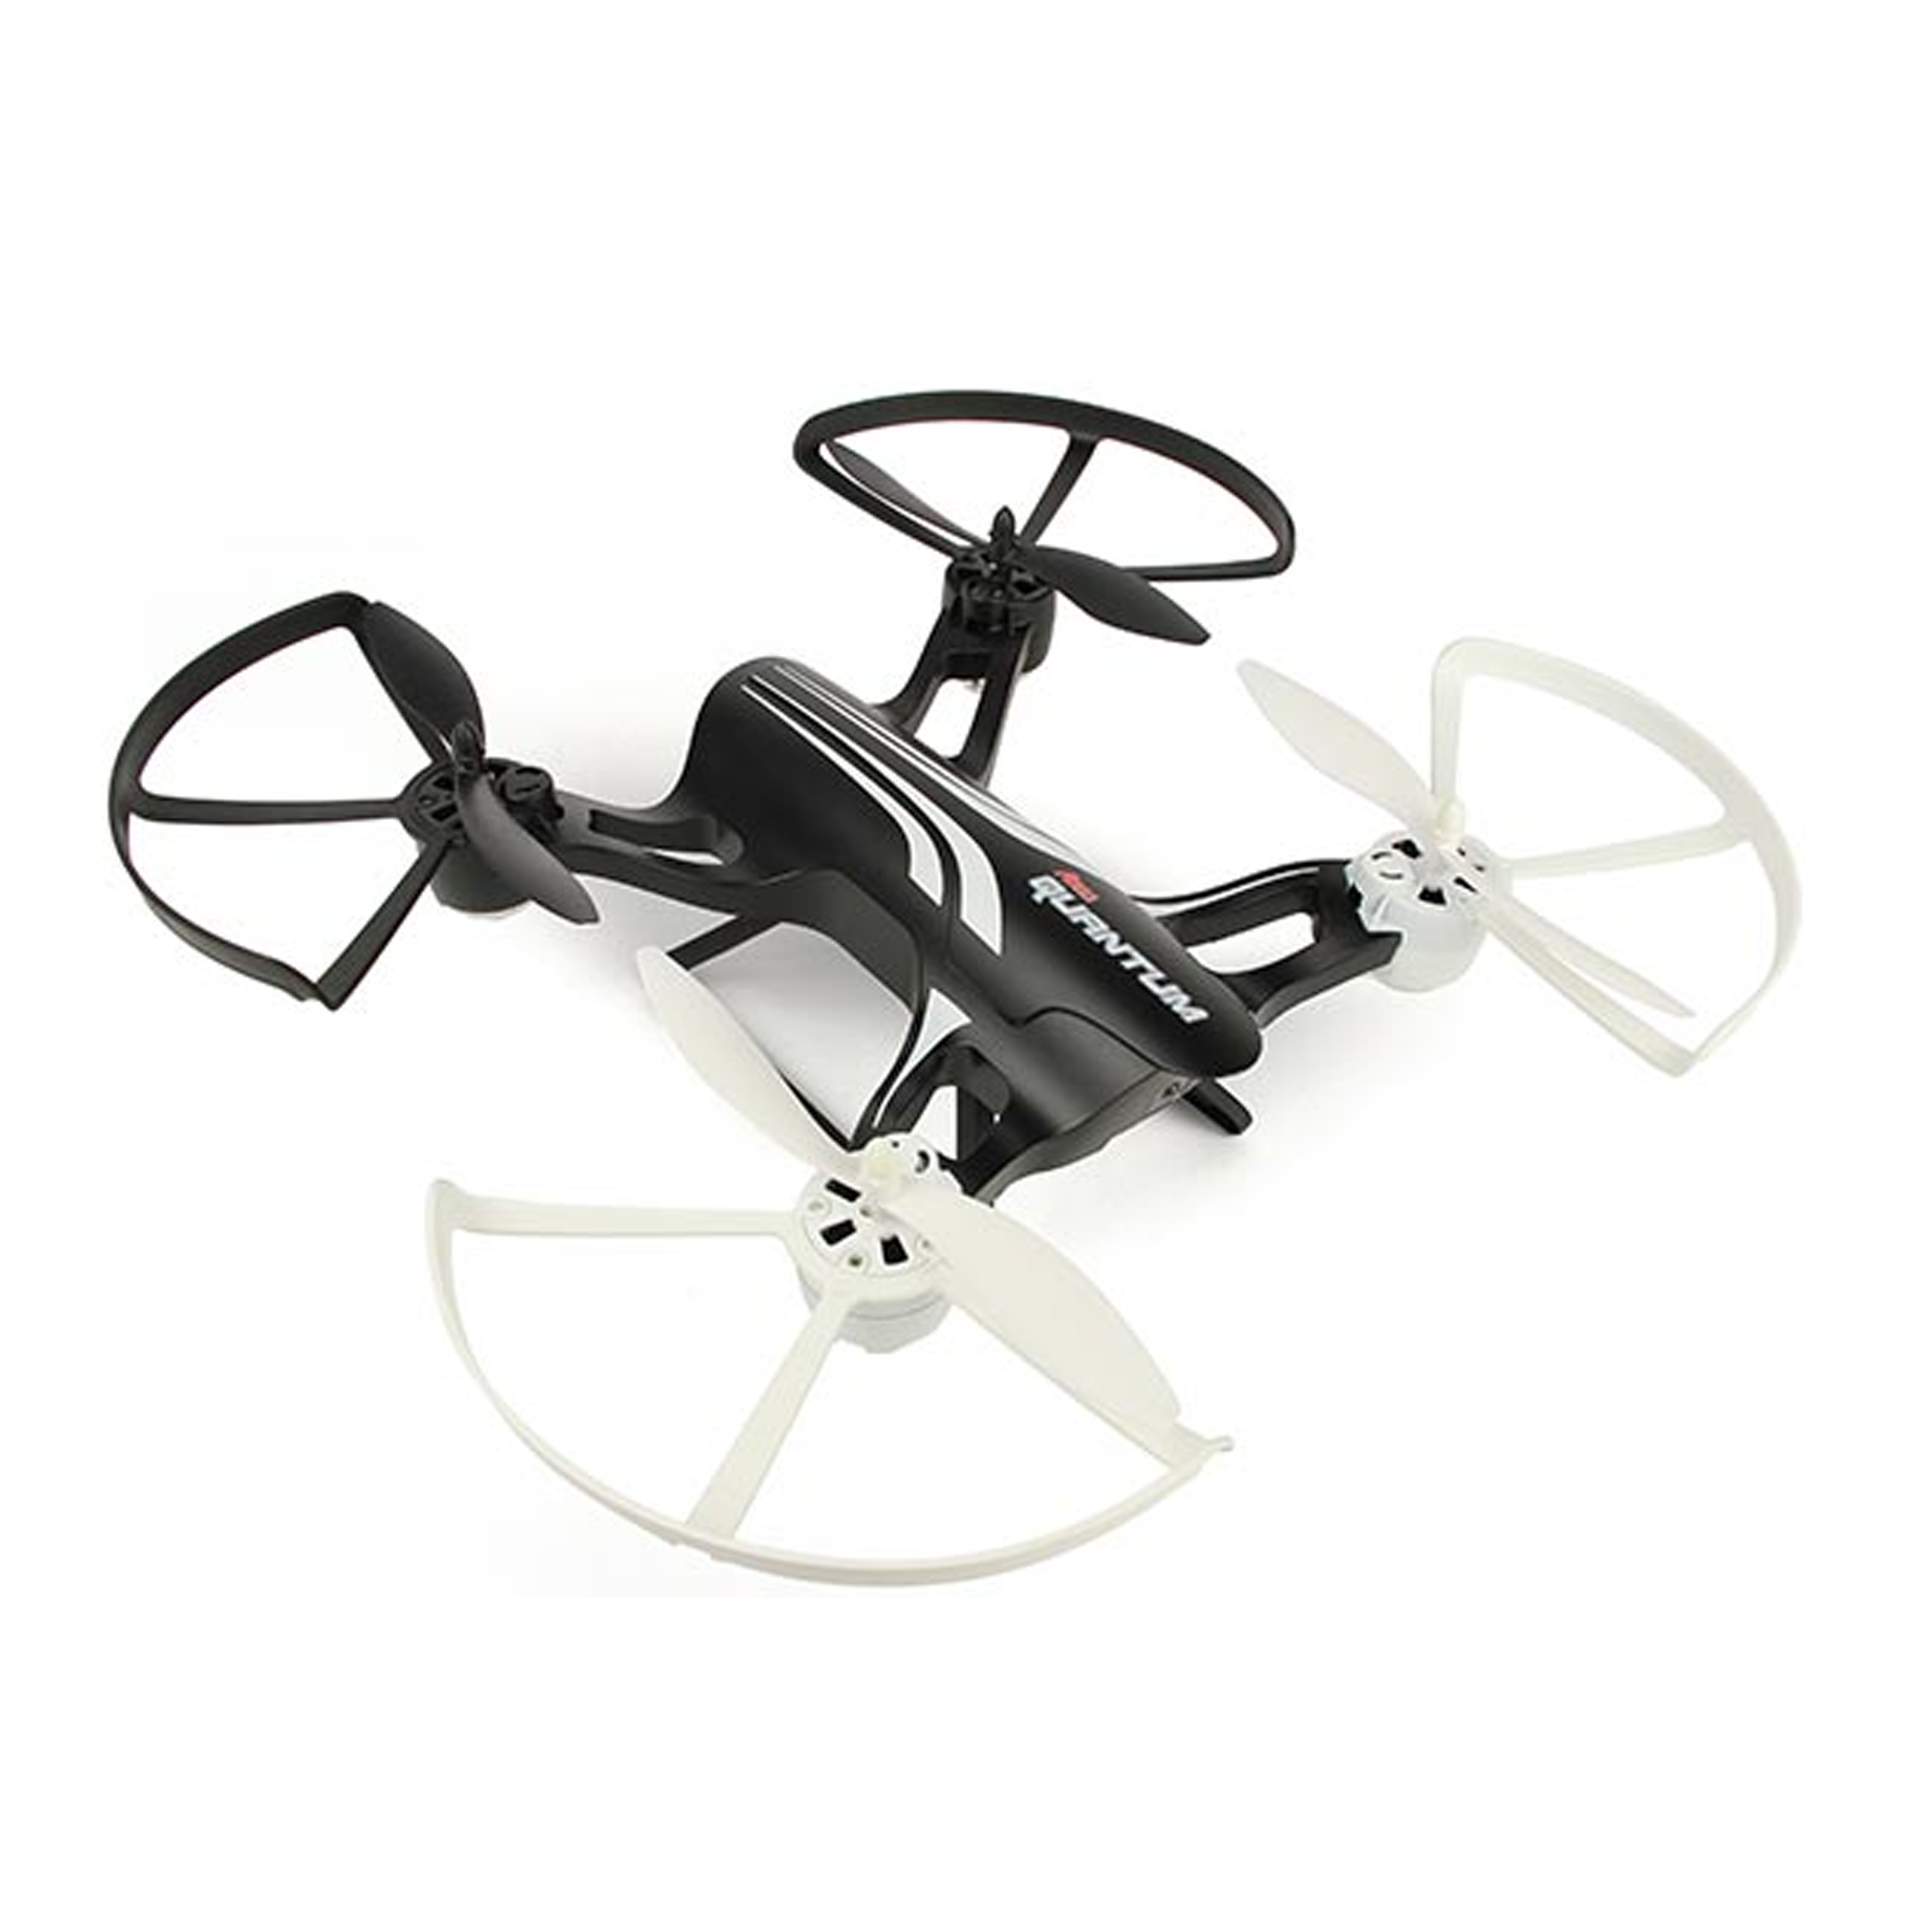 Image of Drone